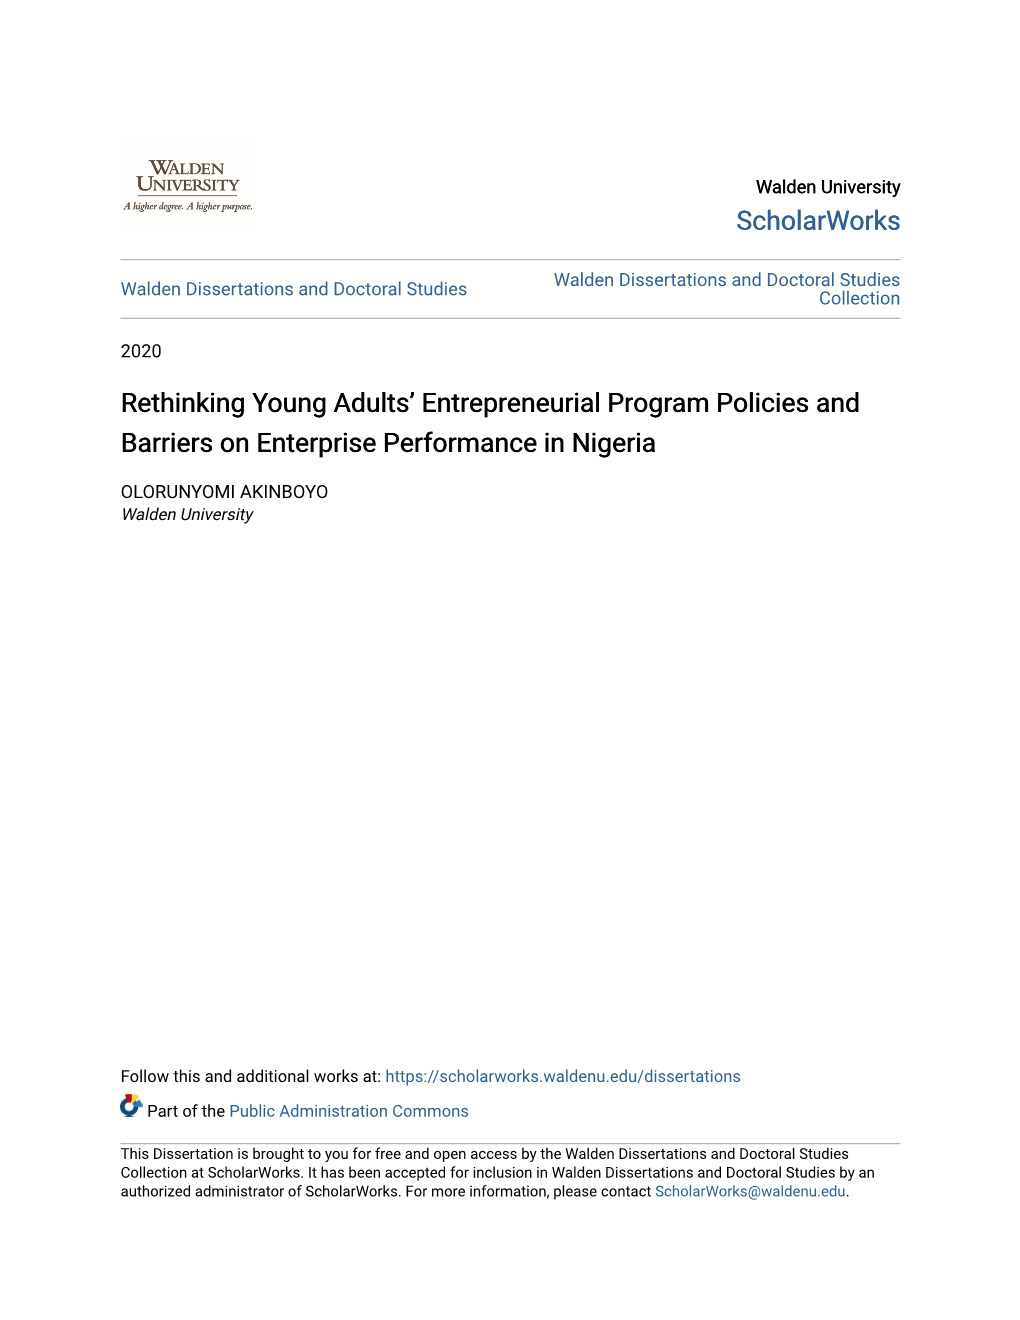 Rethinking Young Adults' Entrepreneurial Program Policies and Barriers on Enterprise Performance in Nigeria